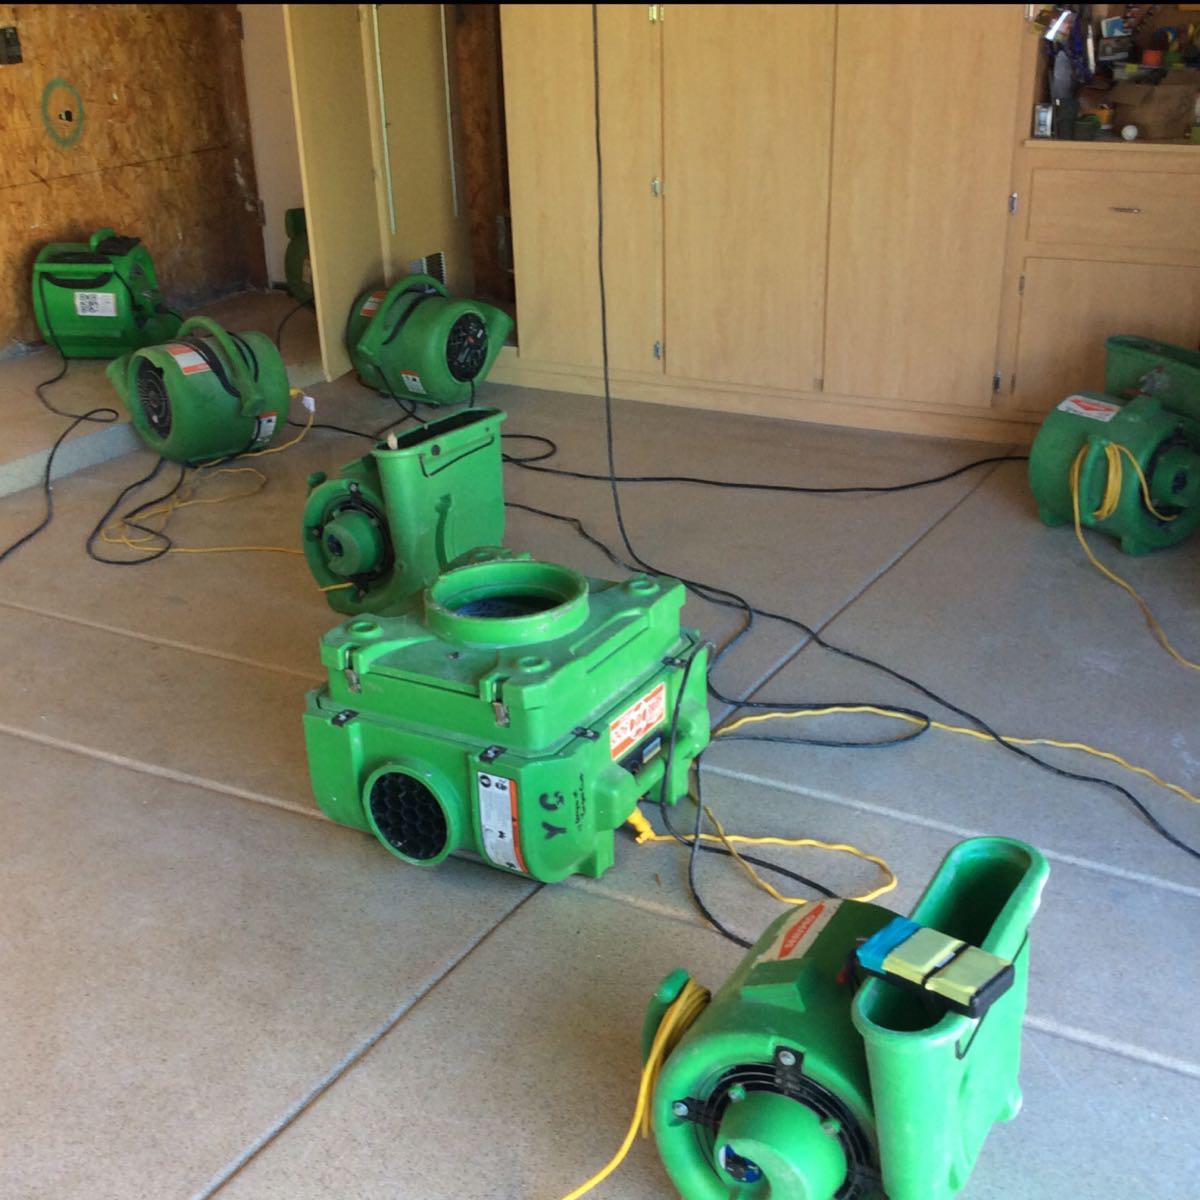 For water damage emergencies, SERVPRO of Yavapai County is prepared to handle your needs. Our trained professionals are available 24 hours a day, 7 days a week, 365 days a year. Please give us a call!